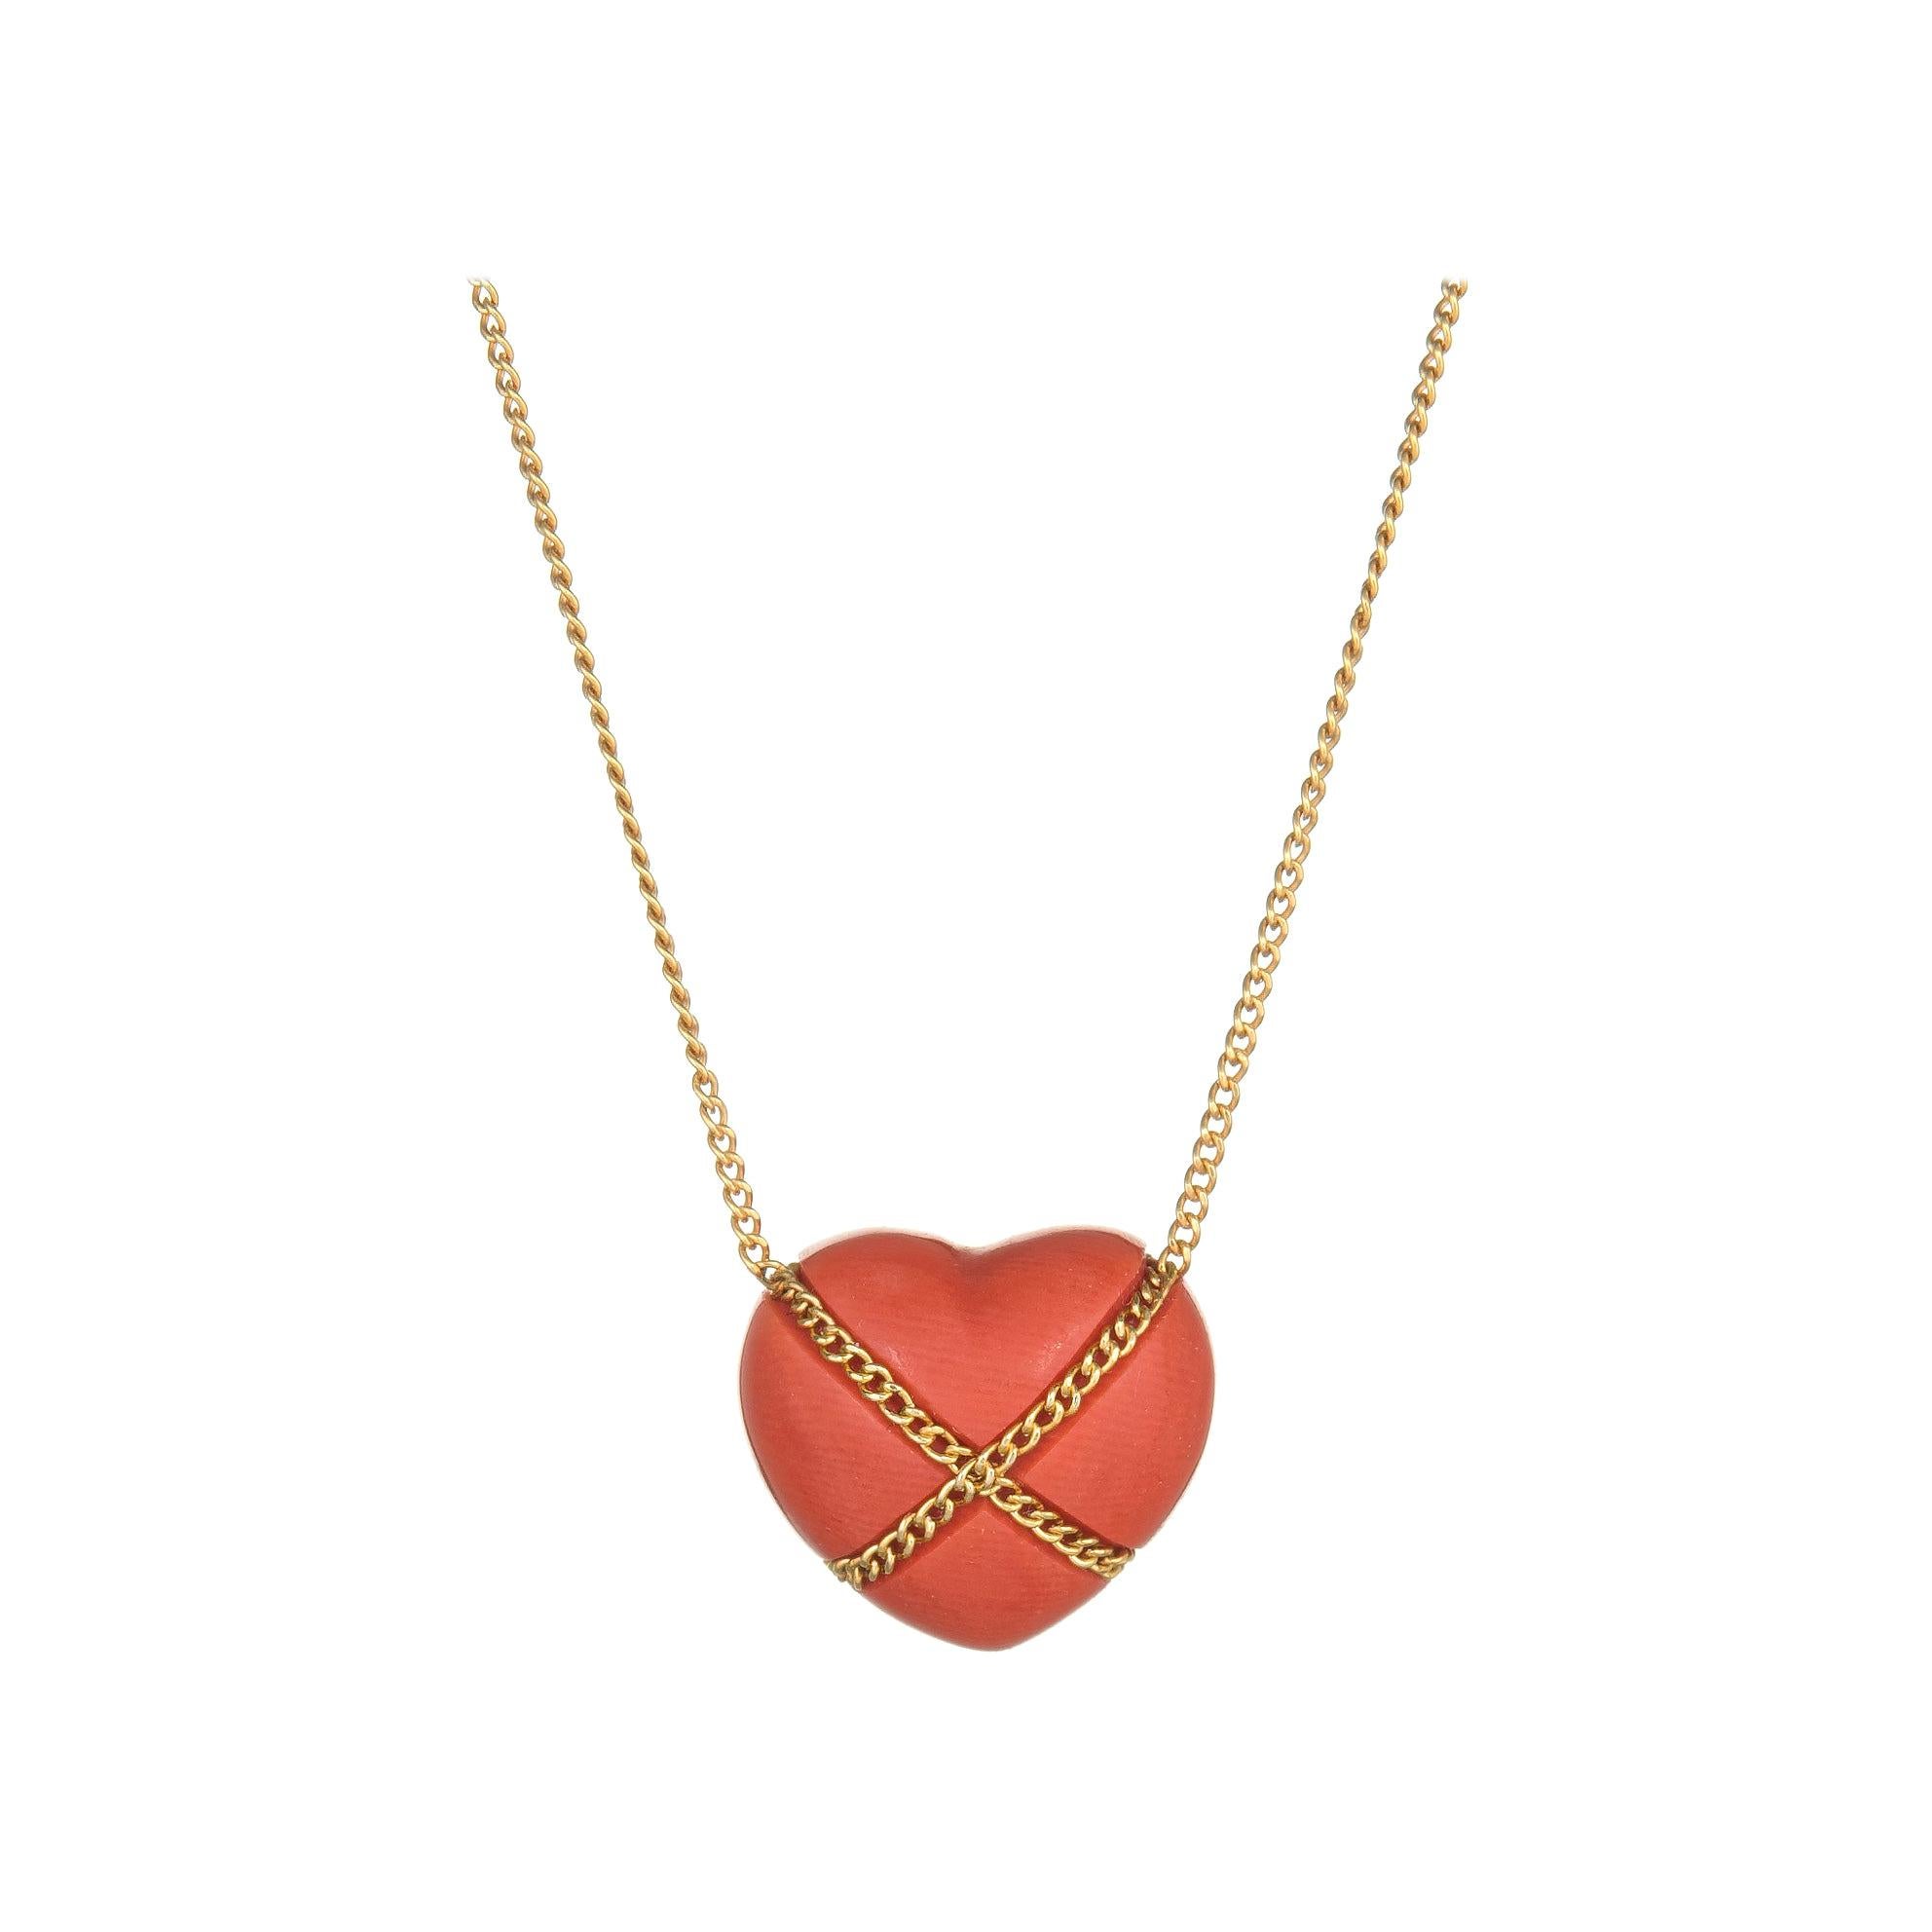 Vintage Tiffany & Co. Coral Cross My Heart Necklace 18 Karat Gold Crossover